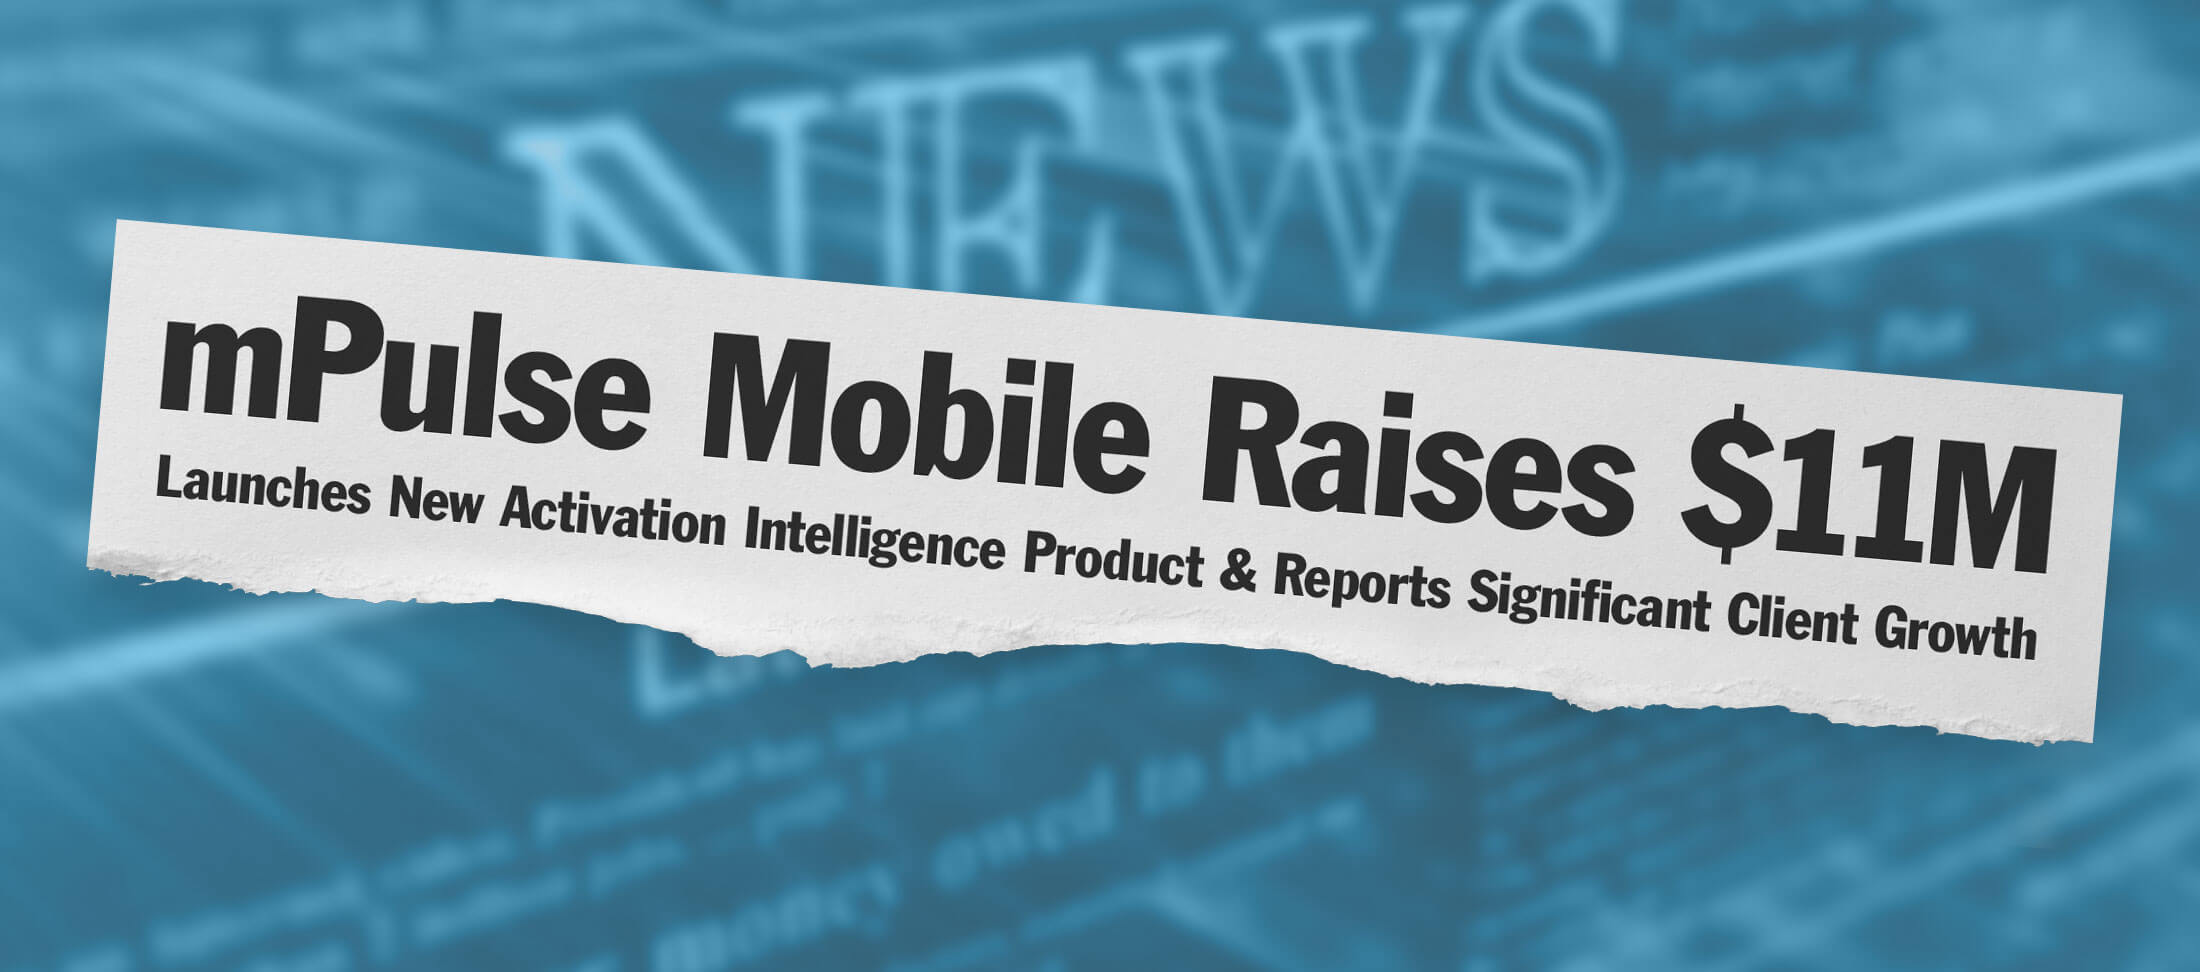 mPulse Mobile Raises $11M, Launches New Activation Intelligence Product & Reports Significant Client Growth